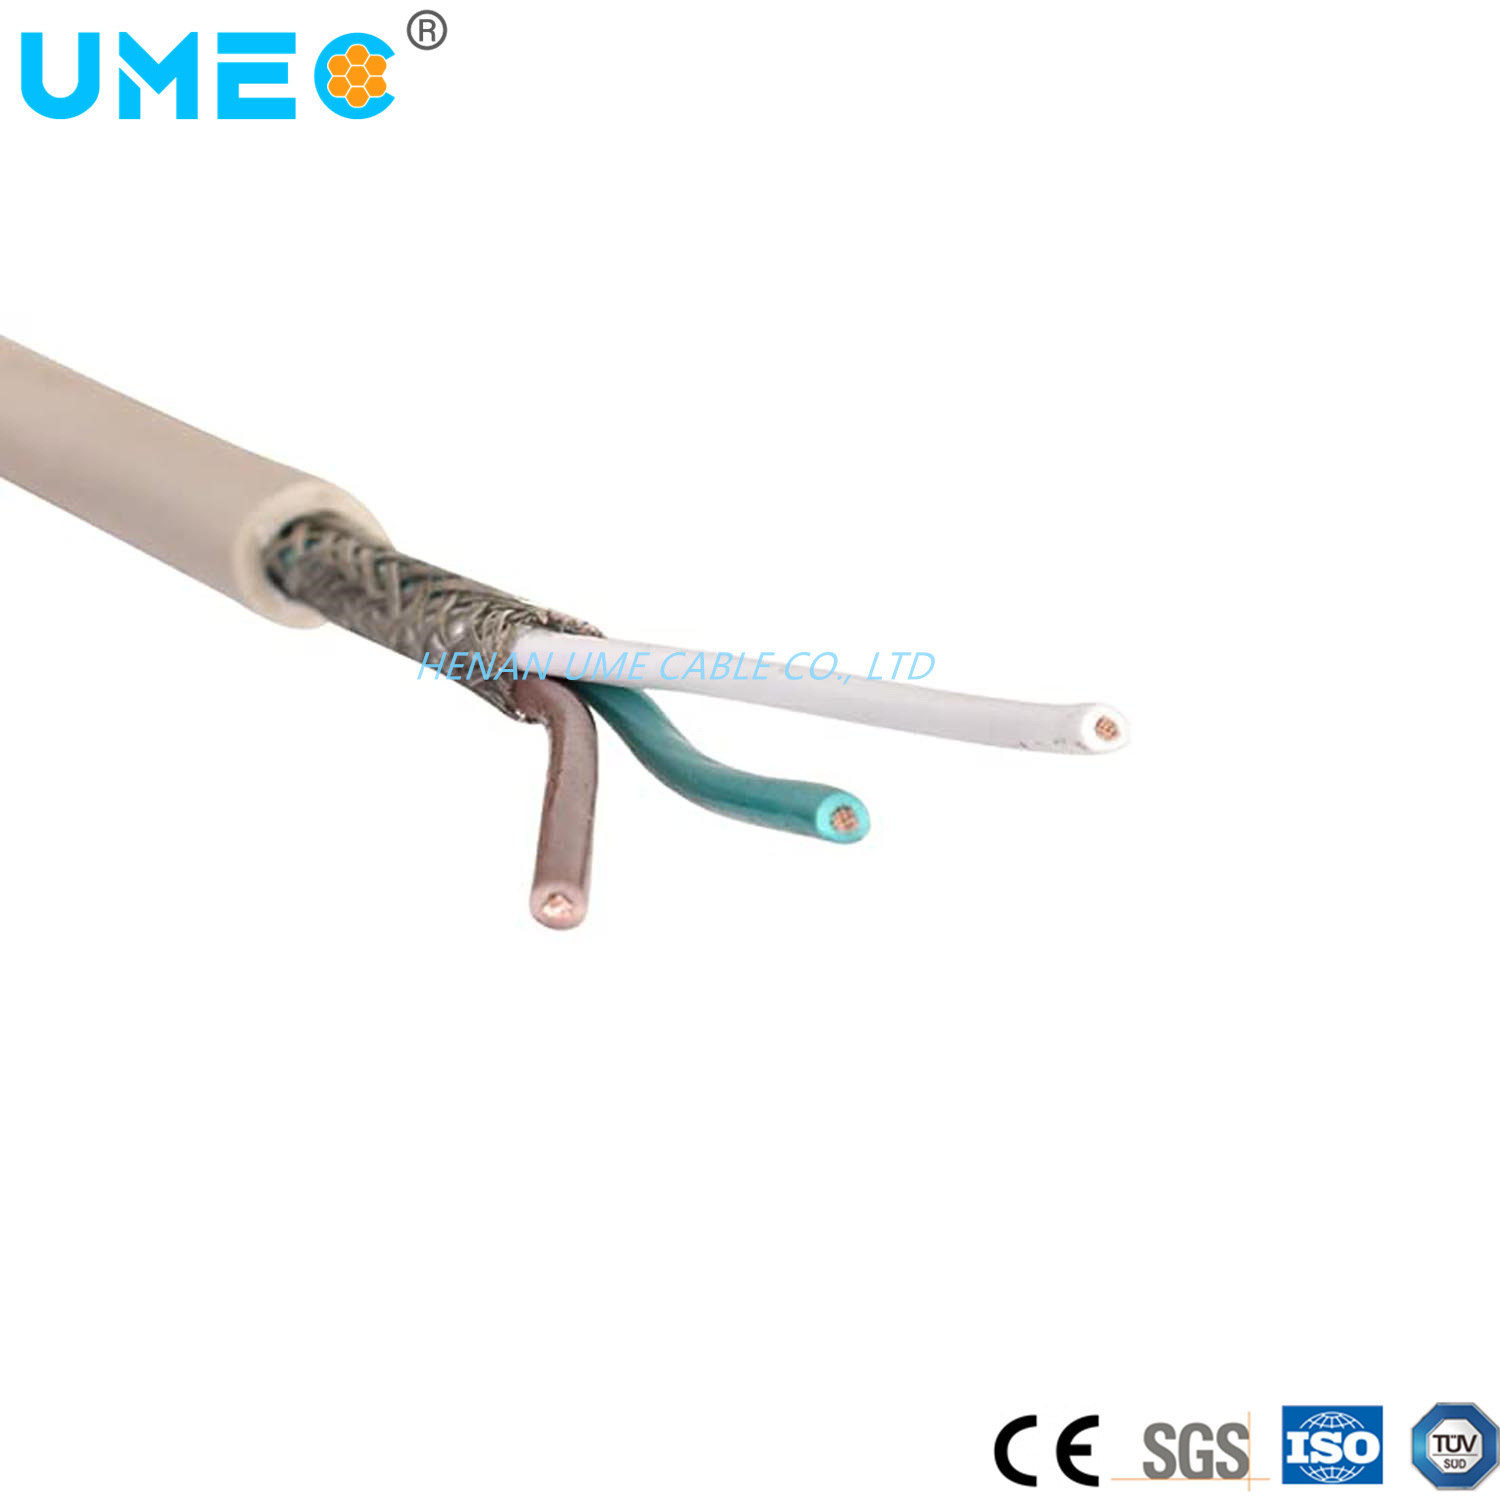 Multicore Control Cable Copper Tape Tcwb Shielding Wire Cable 2 3 4 5 6 7 12 14 16 Core Liycy Communication Cable Wire